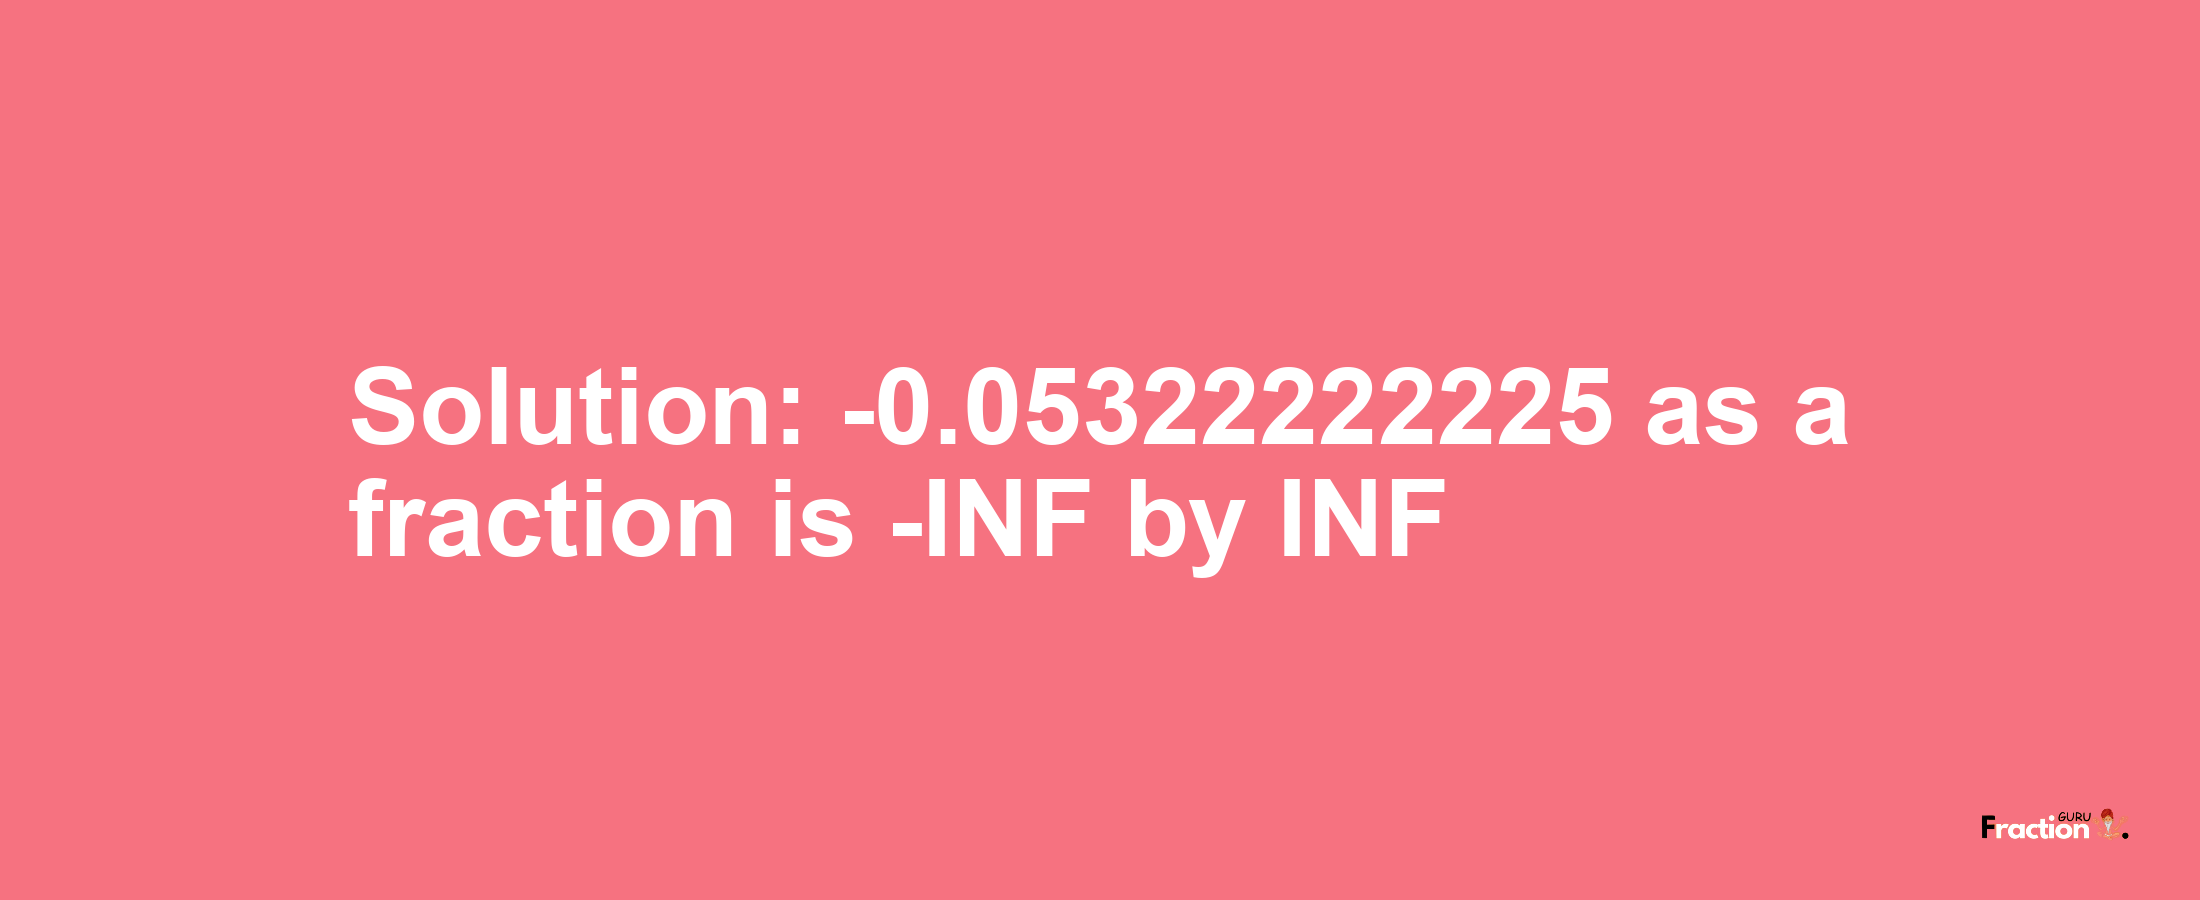 Solution:-0.05322222225 as a fraction is -INF/INF